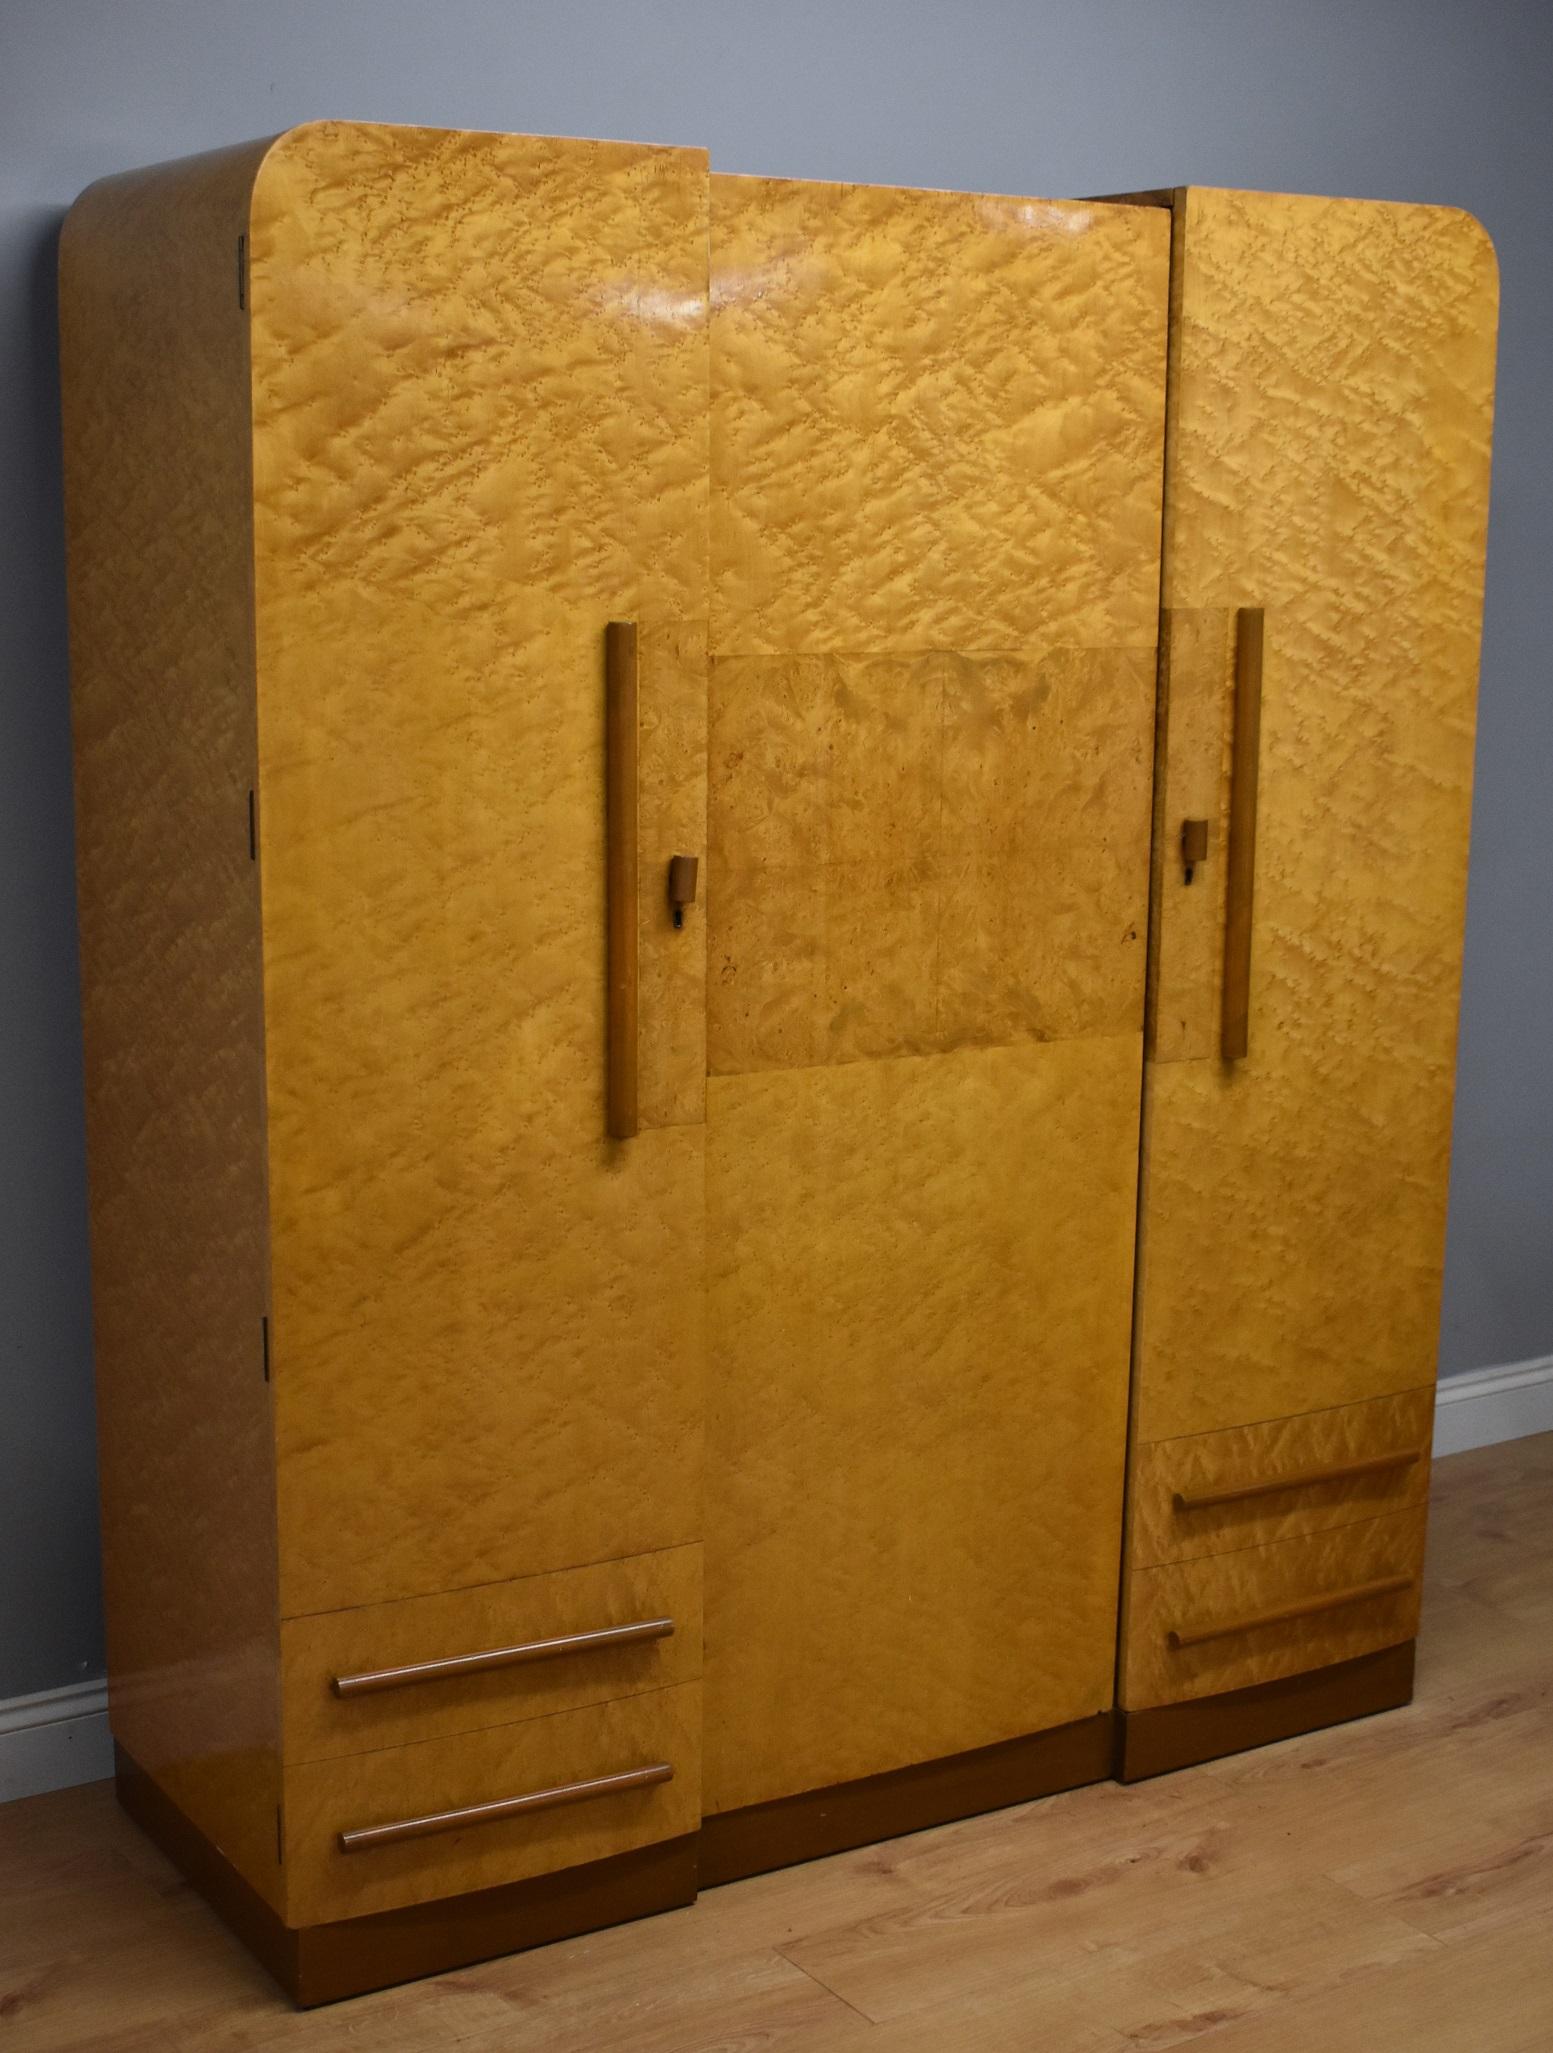 For sale is a good quality Art Deco bird's-eye maple three door wardrobe attributed to H&L Epstein. The wardrobe is constructed from solid mahogany and veneered in bird's-eye maple. has in inverted breakfront form, with three doors, the left and